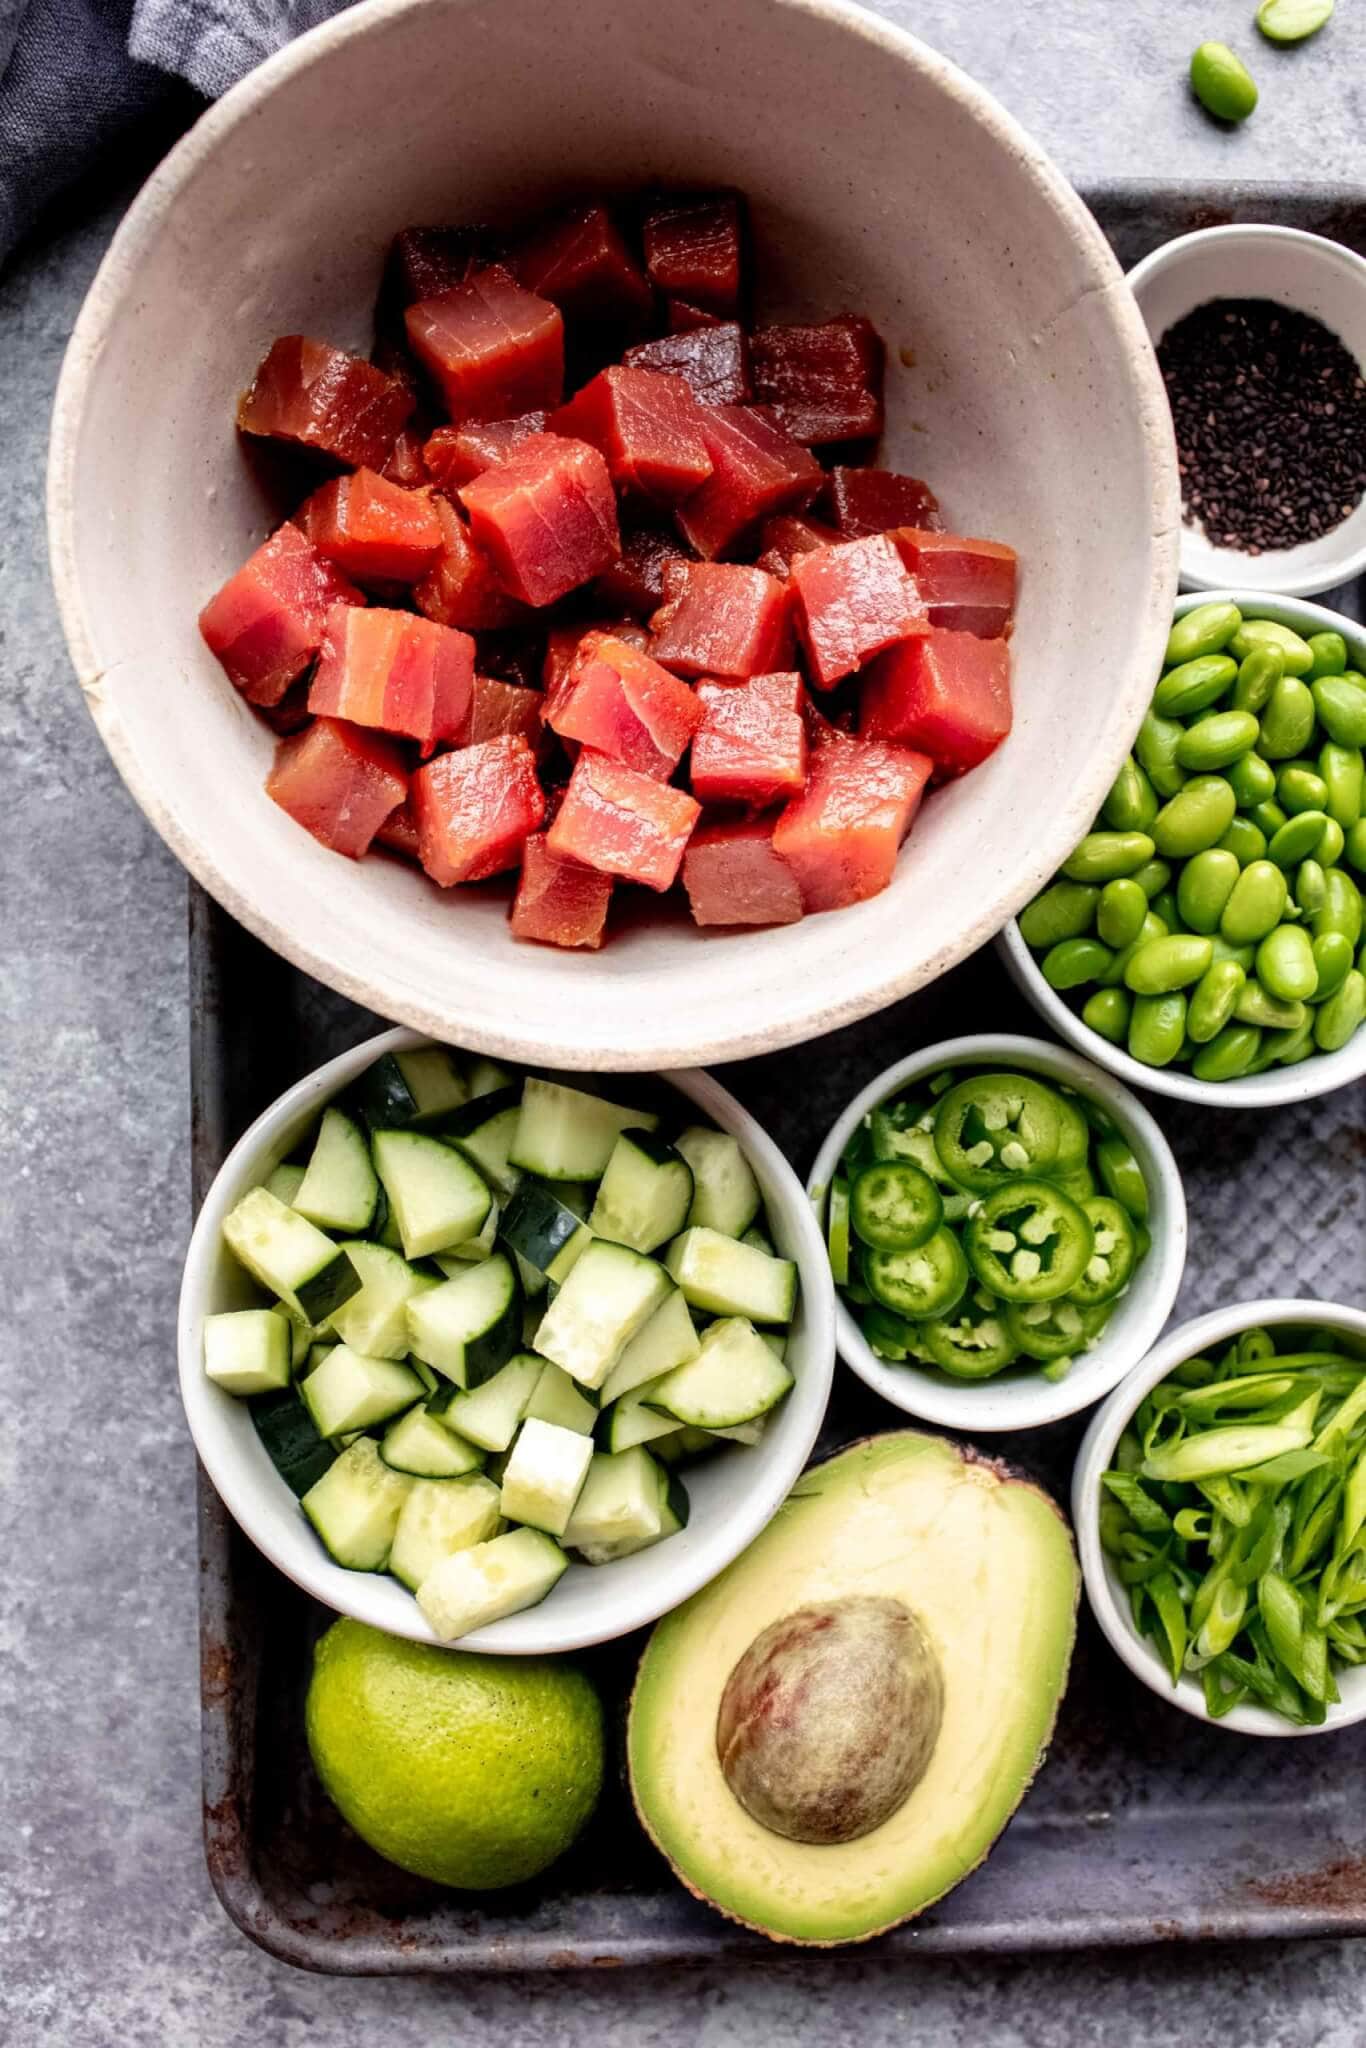 Ingredients for poke bowls laid out on tray